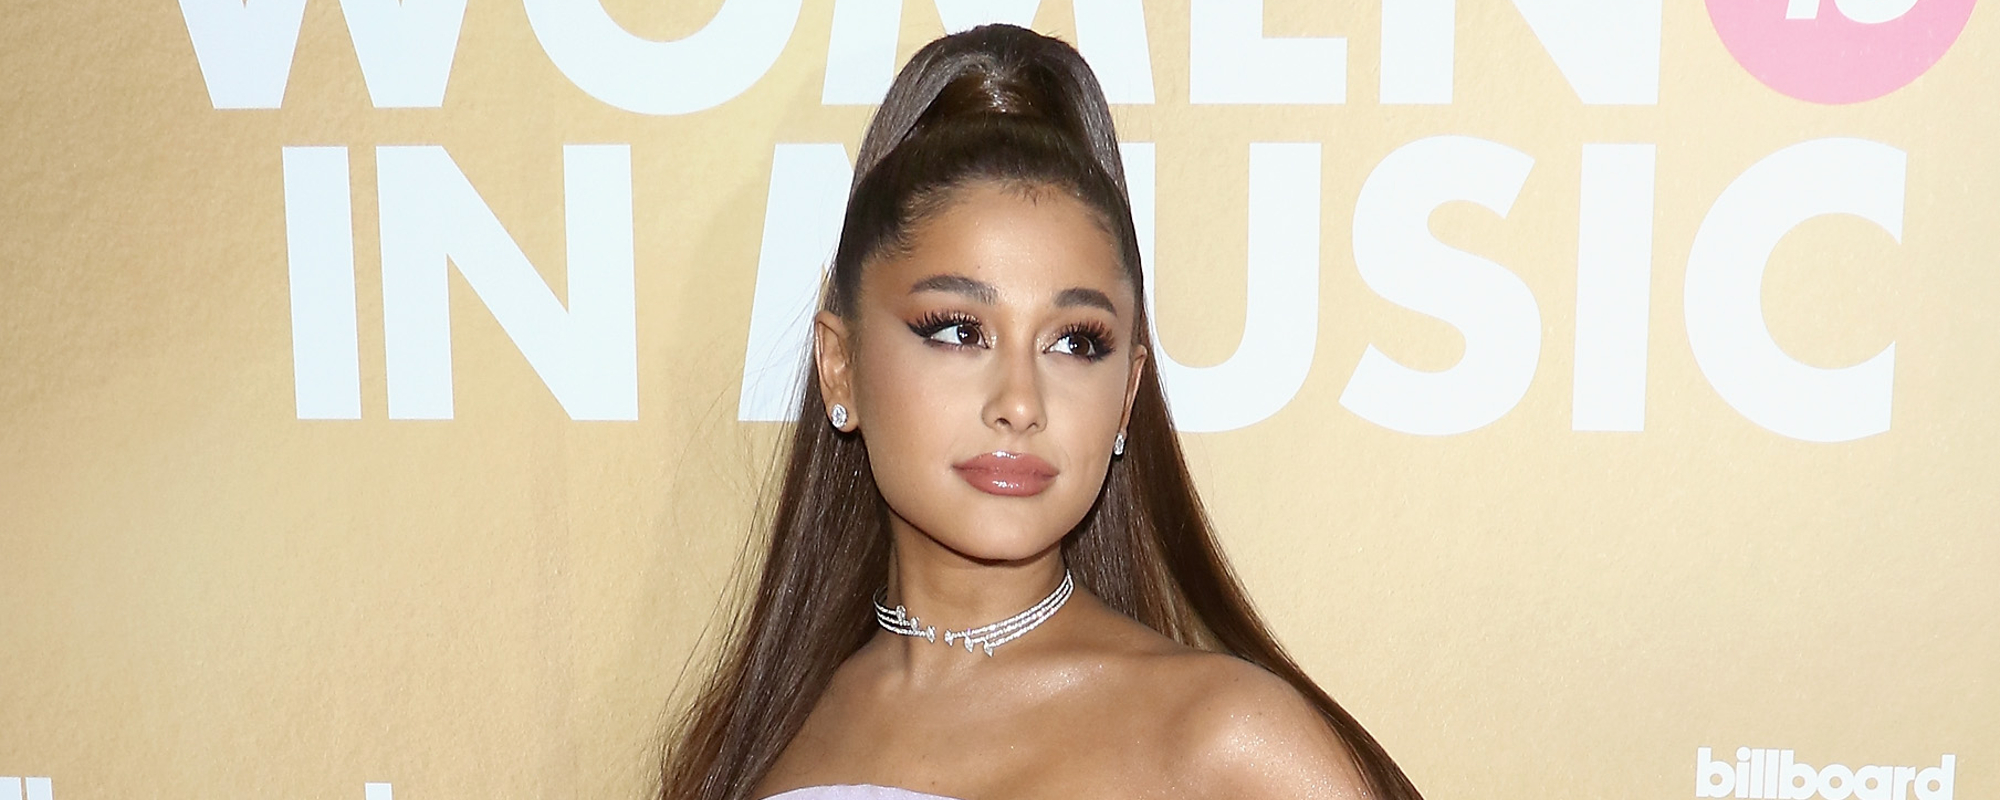 Ariana Grande Teases ‘AG7’ in Cryptic Instagram Post: ”See You Next Year”